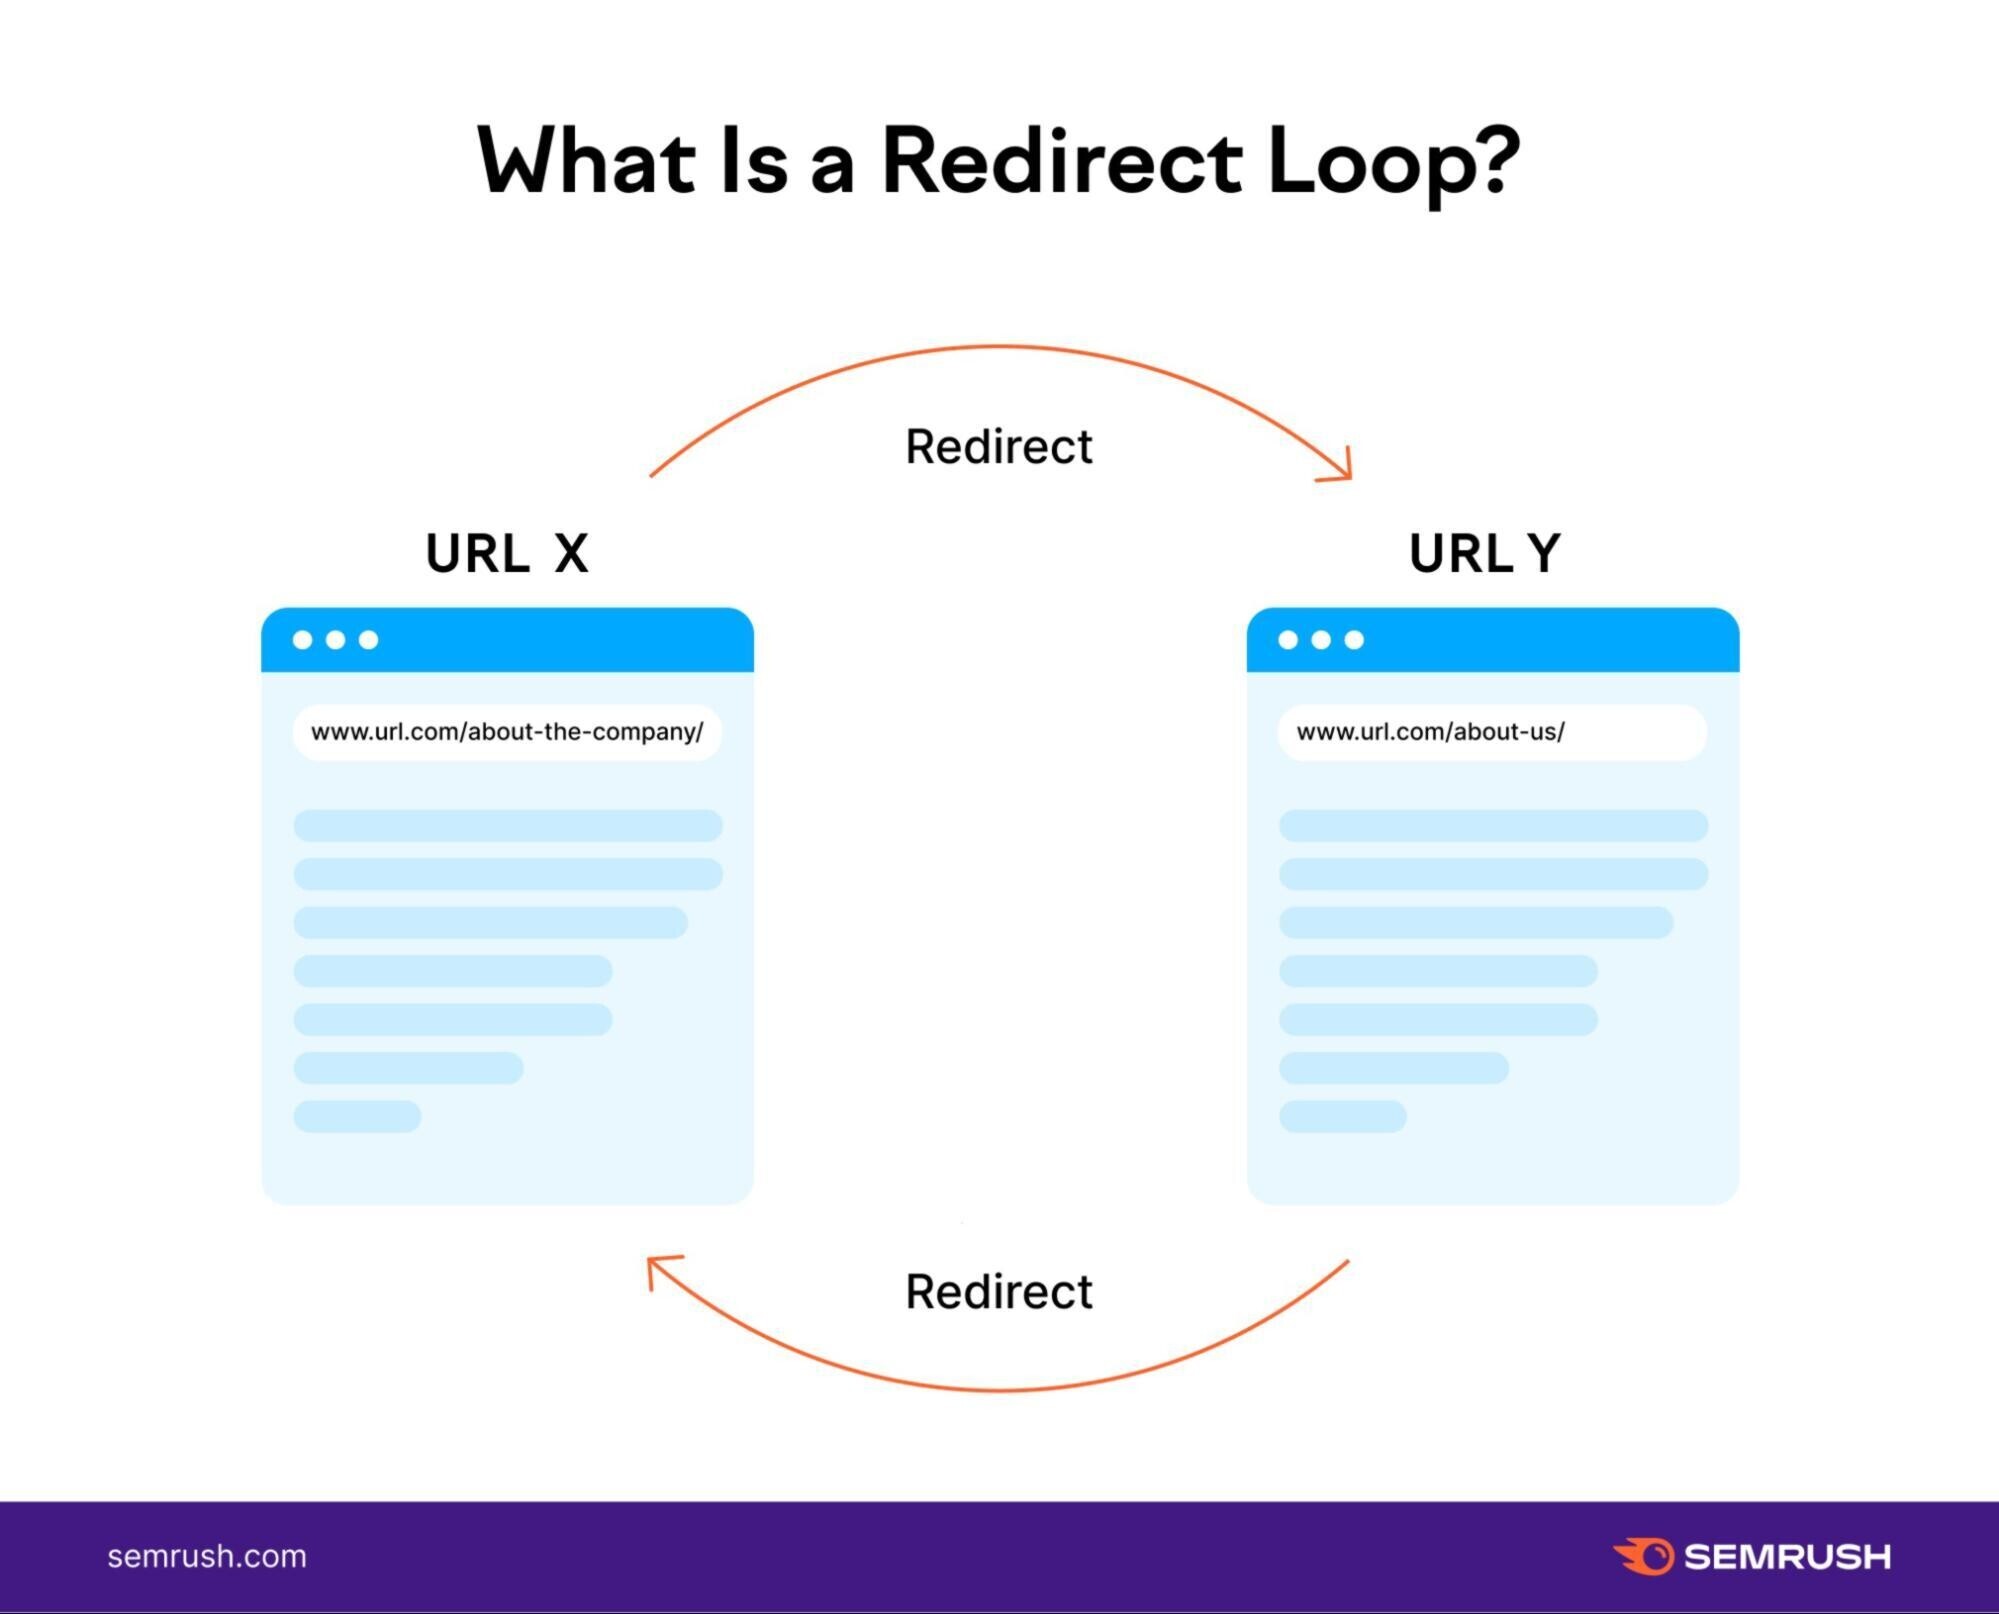 and image titled "What is a redirect loop?"